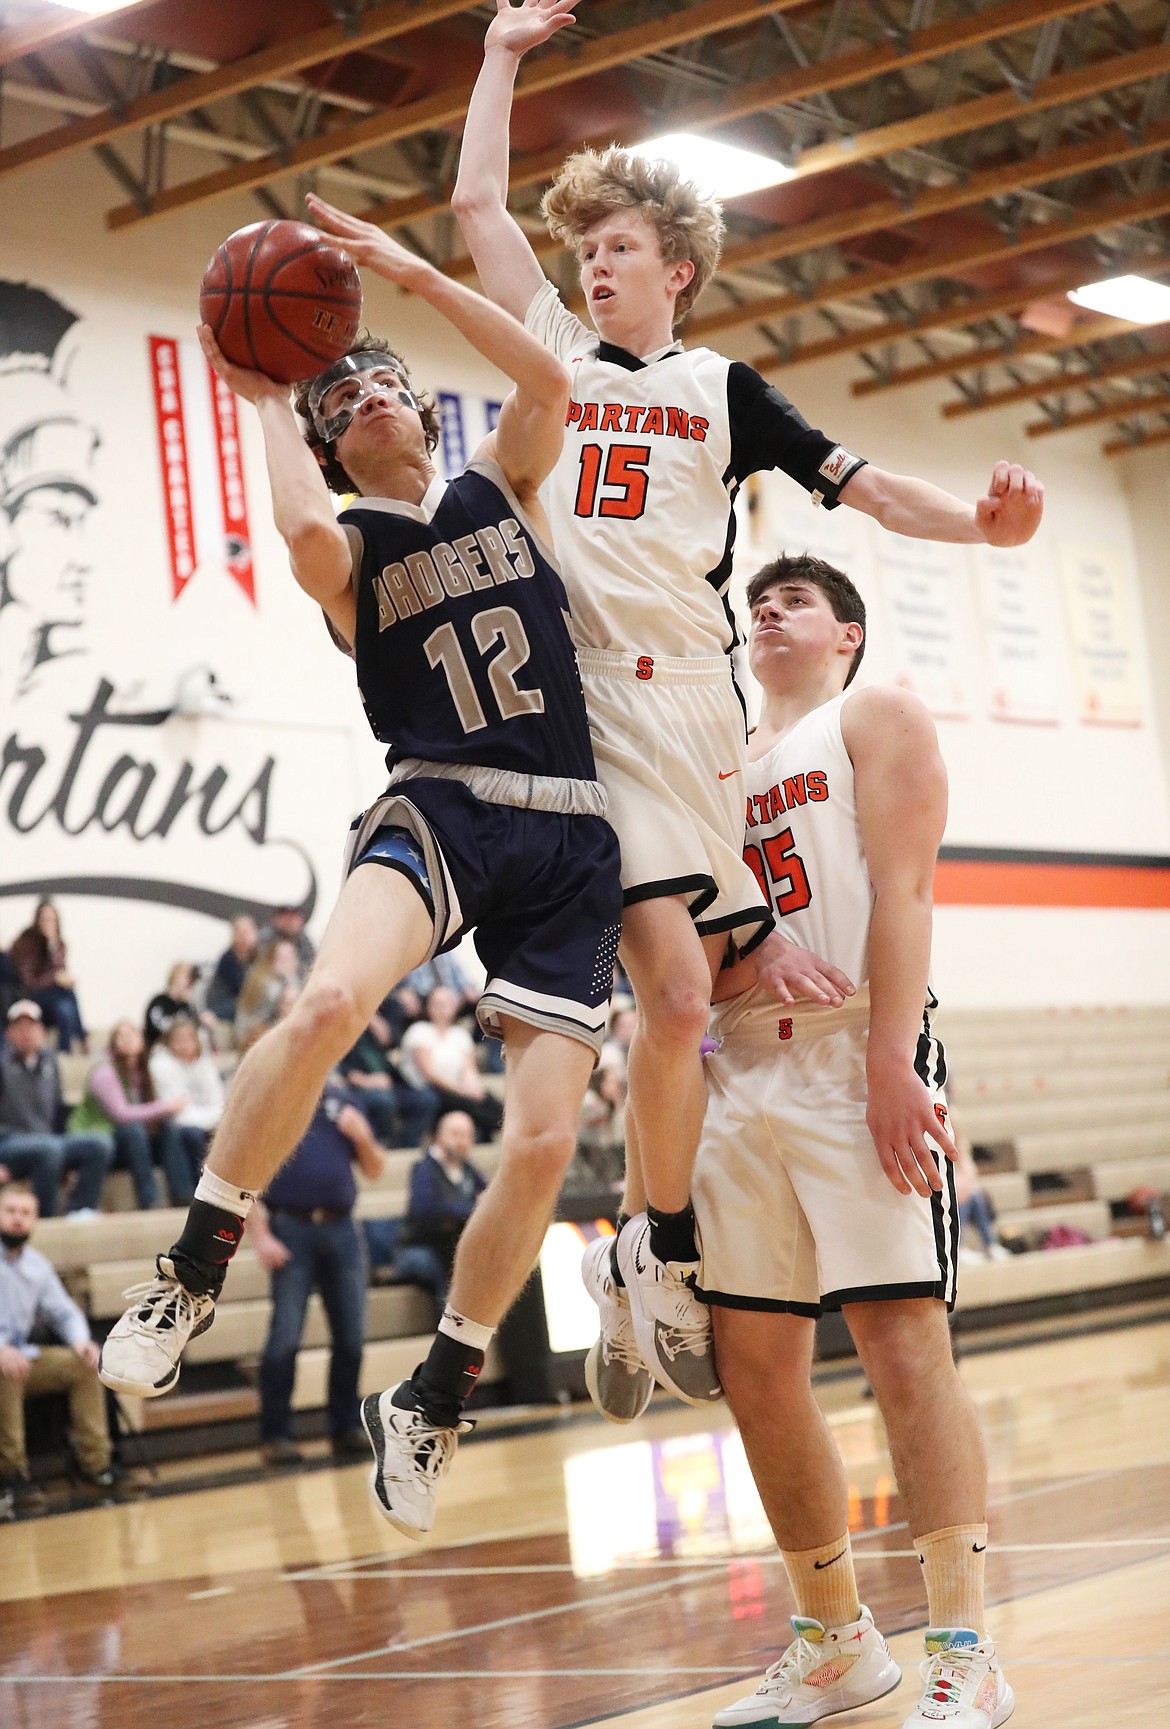 Hayden Stockton from Bonners Ferry attacks the basket and tries to hit a shot while Blake Barrett defends him on Saturday.